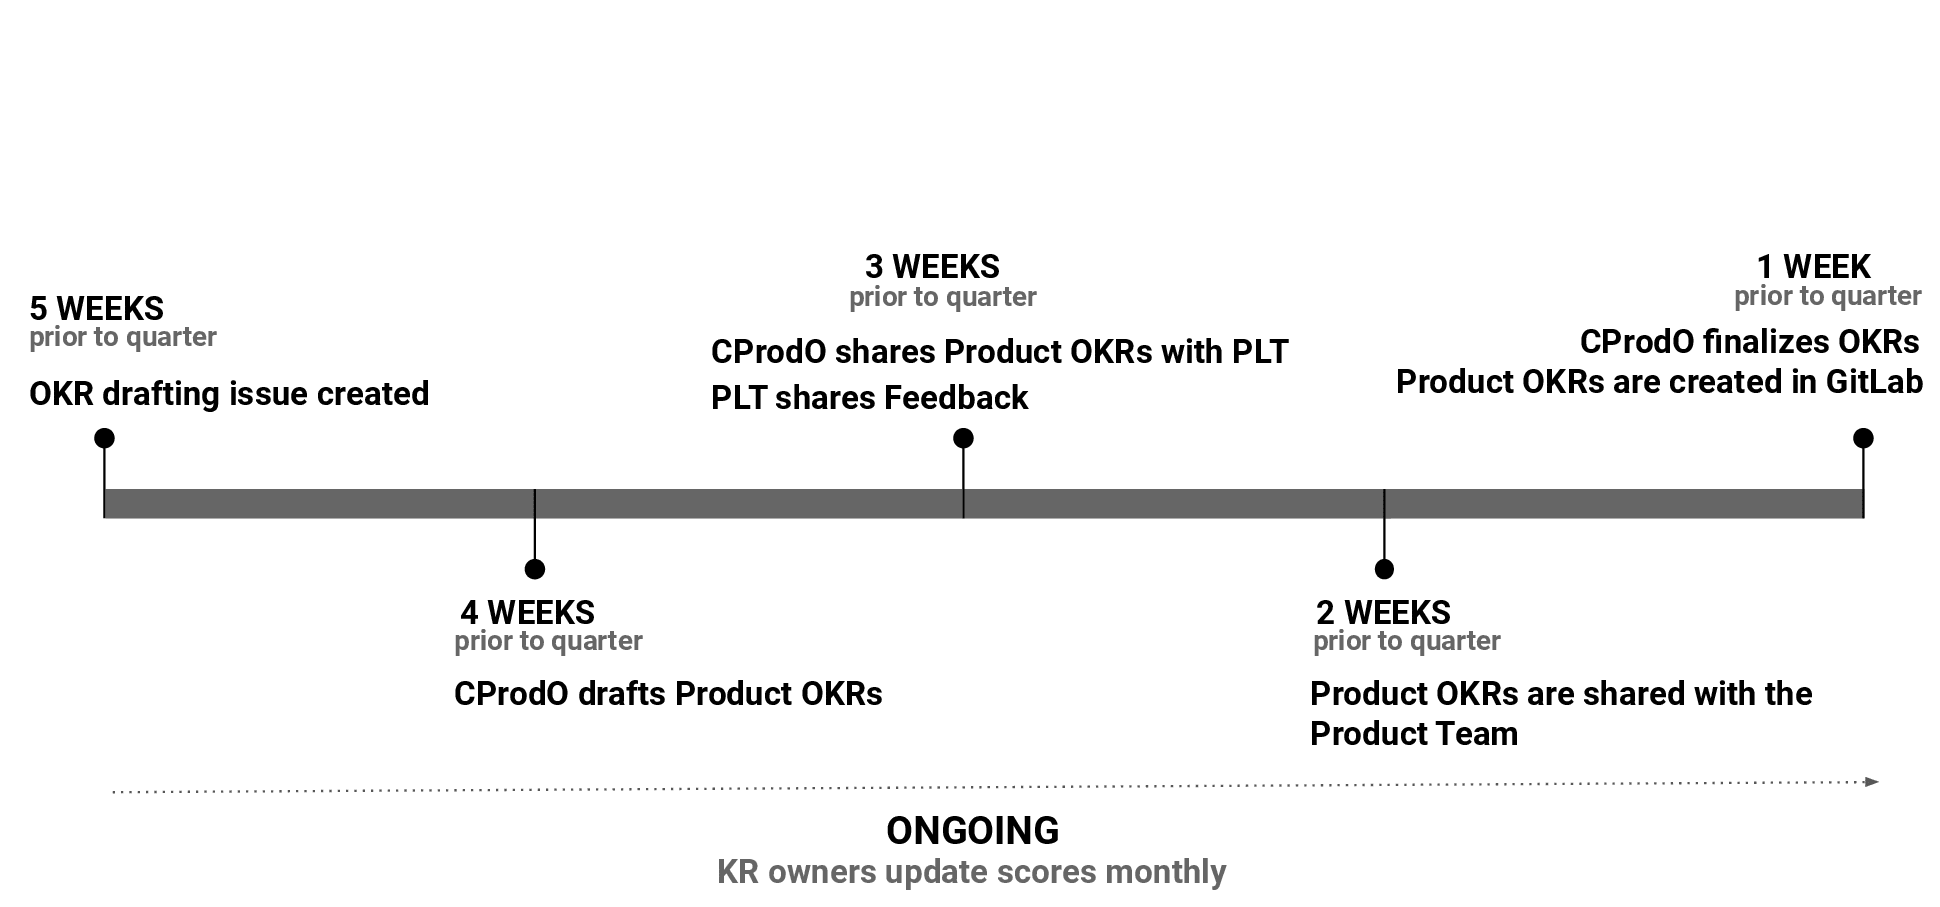 General timeline and process 